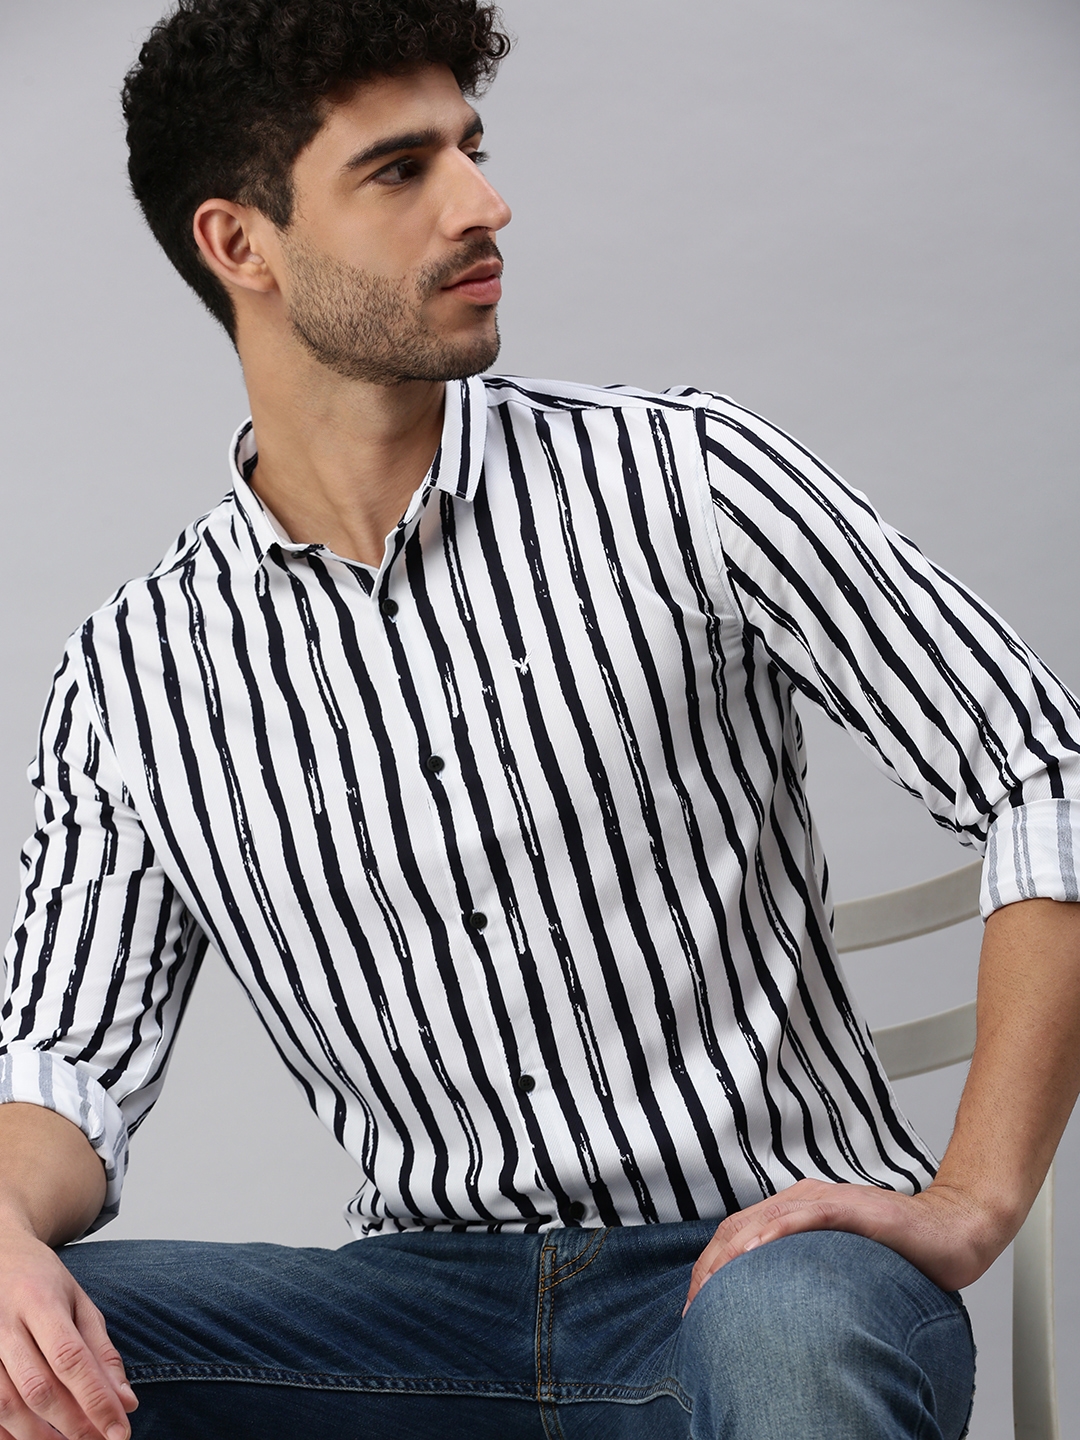 Showoff | SHOWOFF Men's Roll-Up Sleeves White Vertical Stripes Shirts